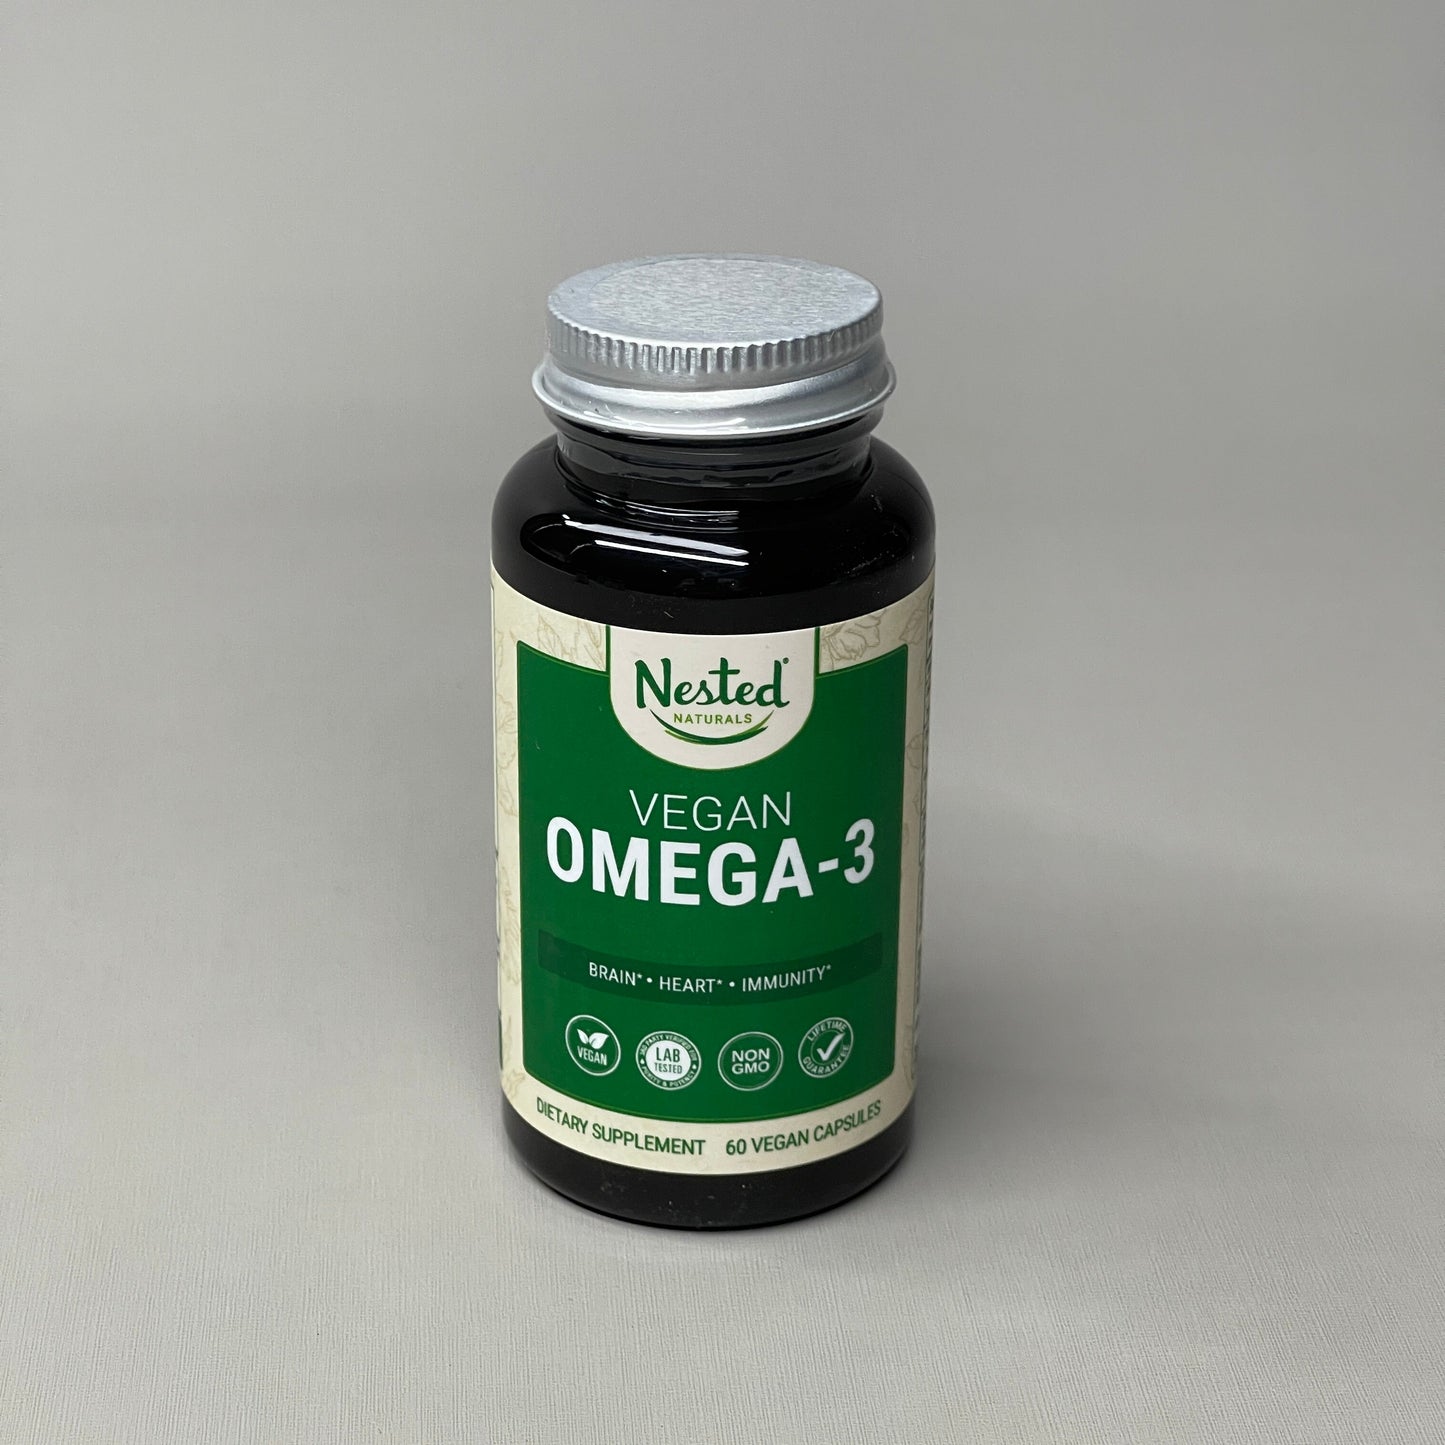 NESTED NATURALS Lot of 10! Vegan Omega 3 & 6 DHA Supplement (Heart, Brain, Joint) 60 Capsules 01/24 (New Other)